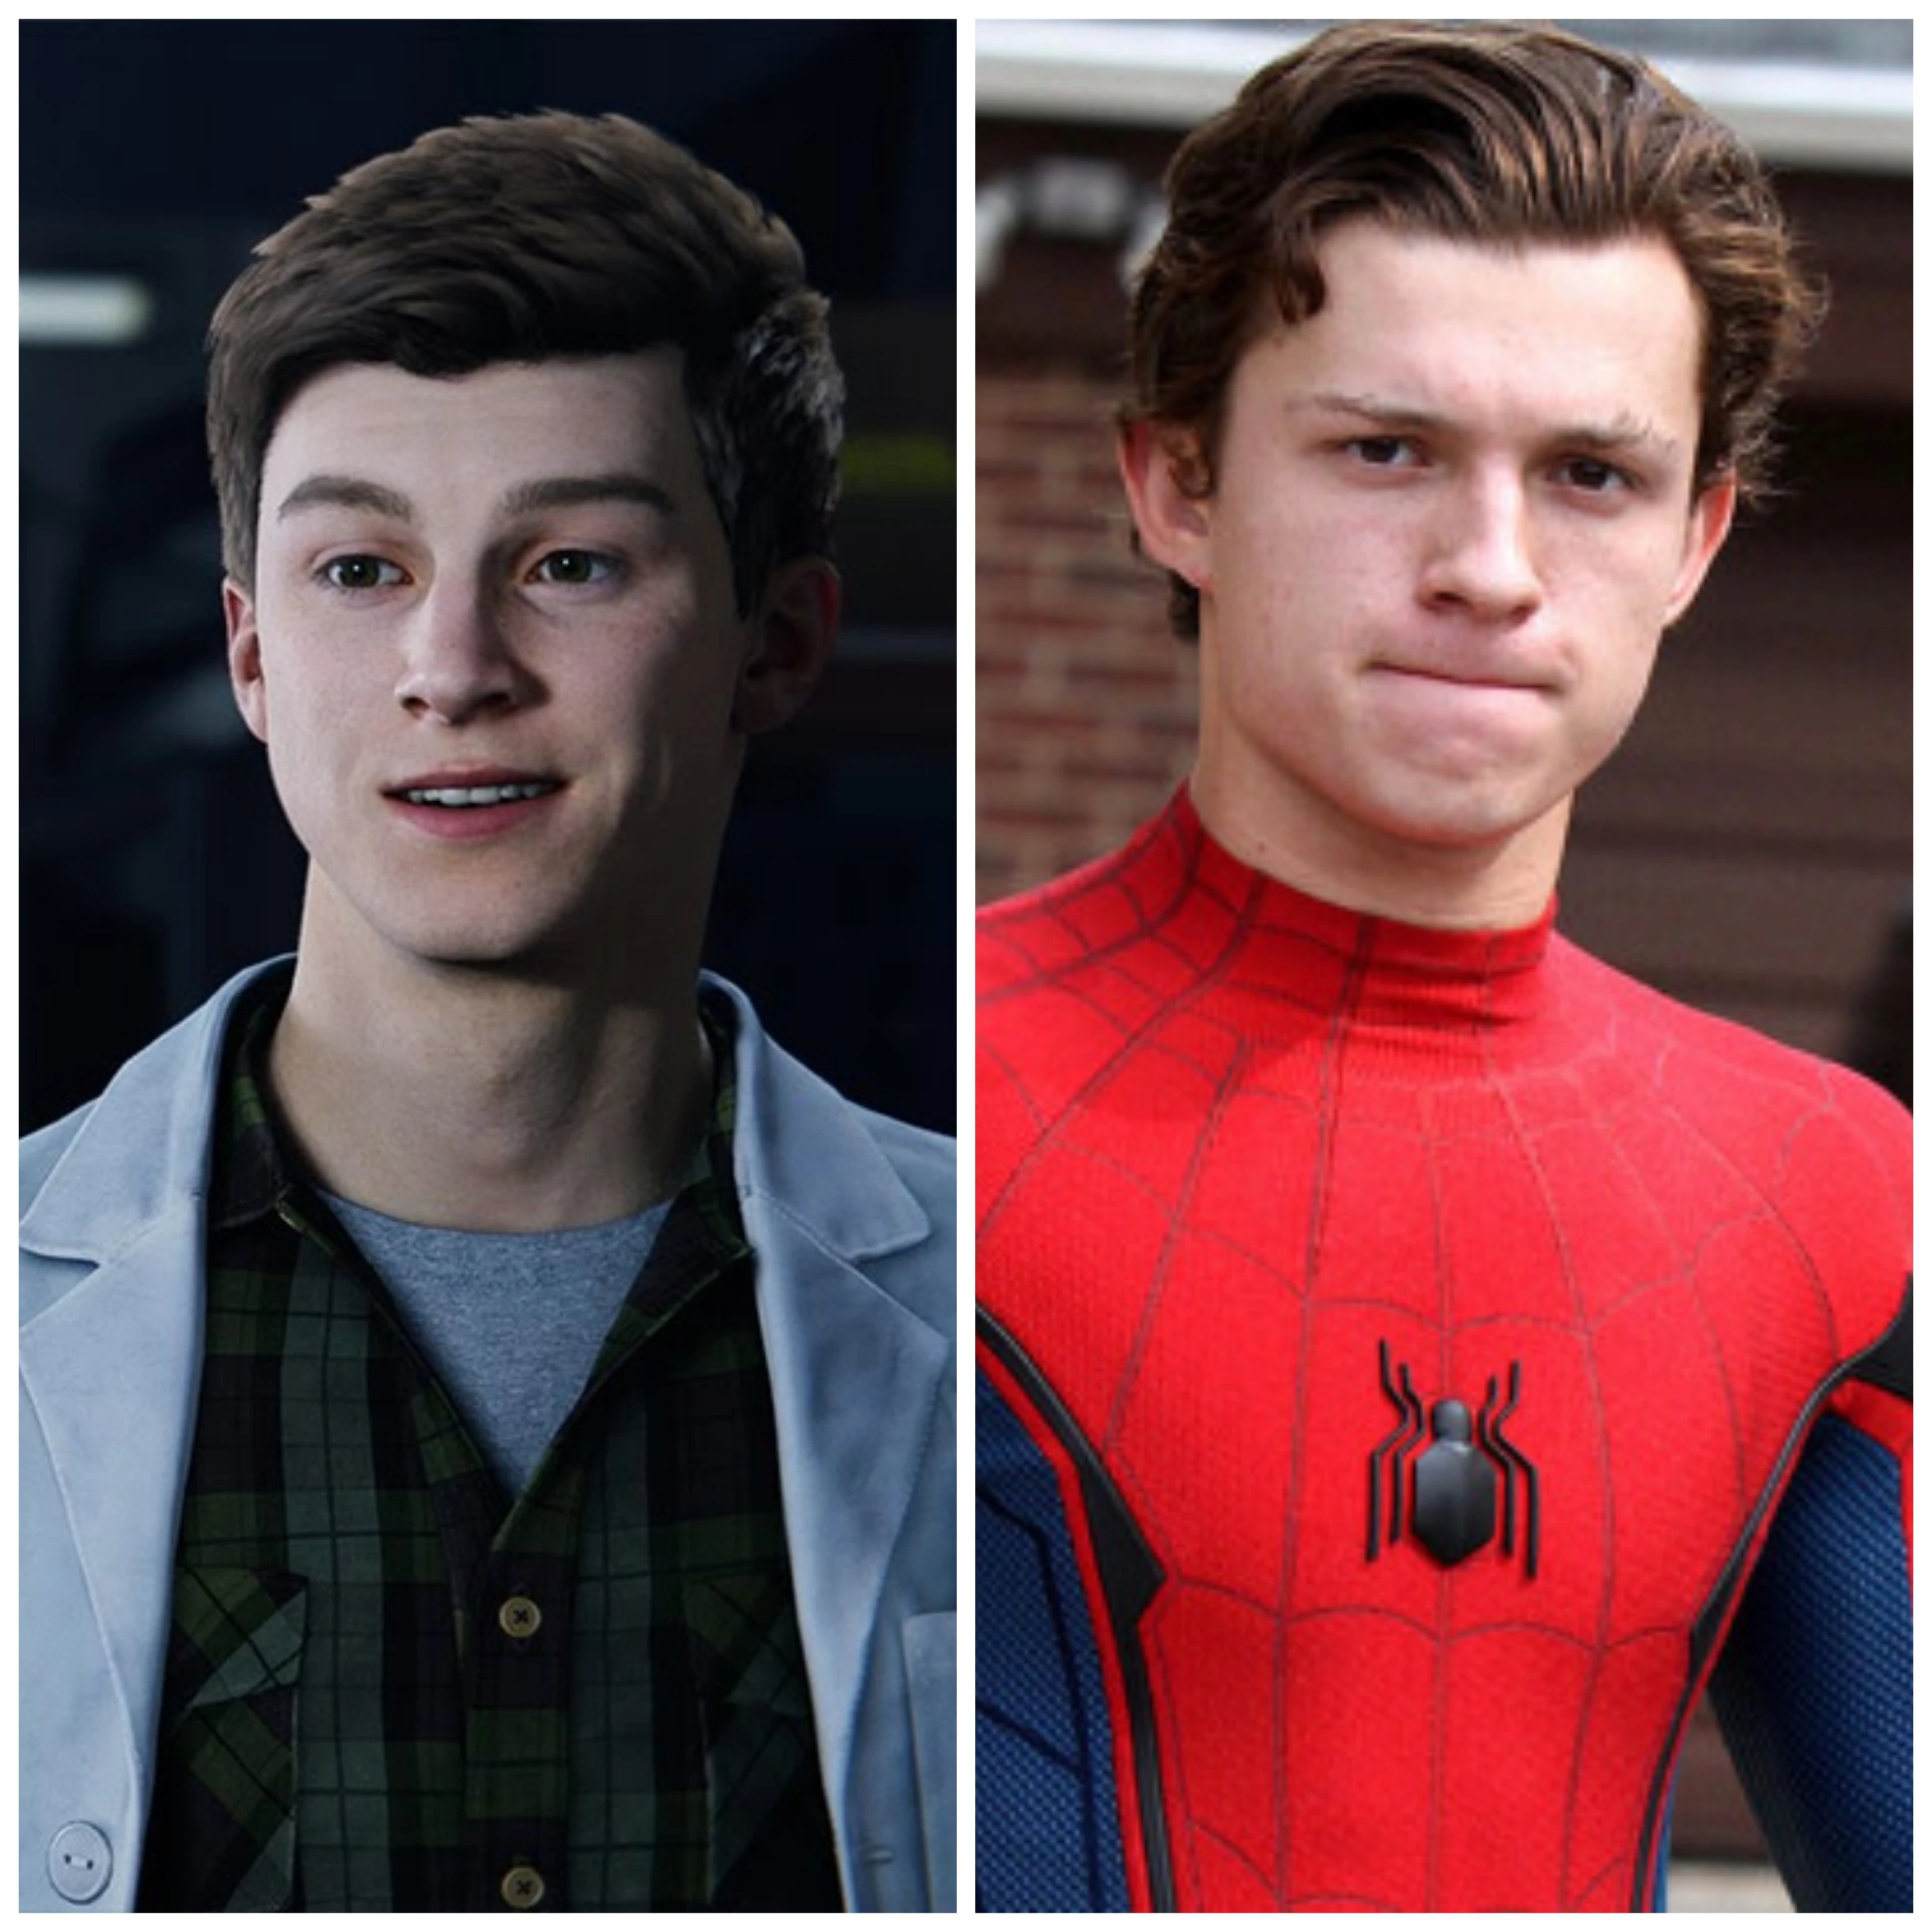 Who Looks the Most Like Spider-Man/Peter Parker? [Poll]